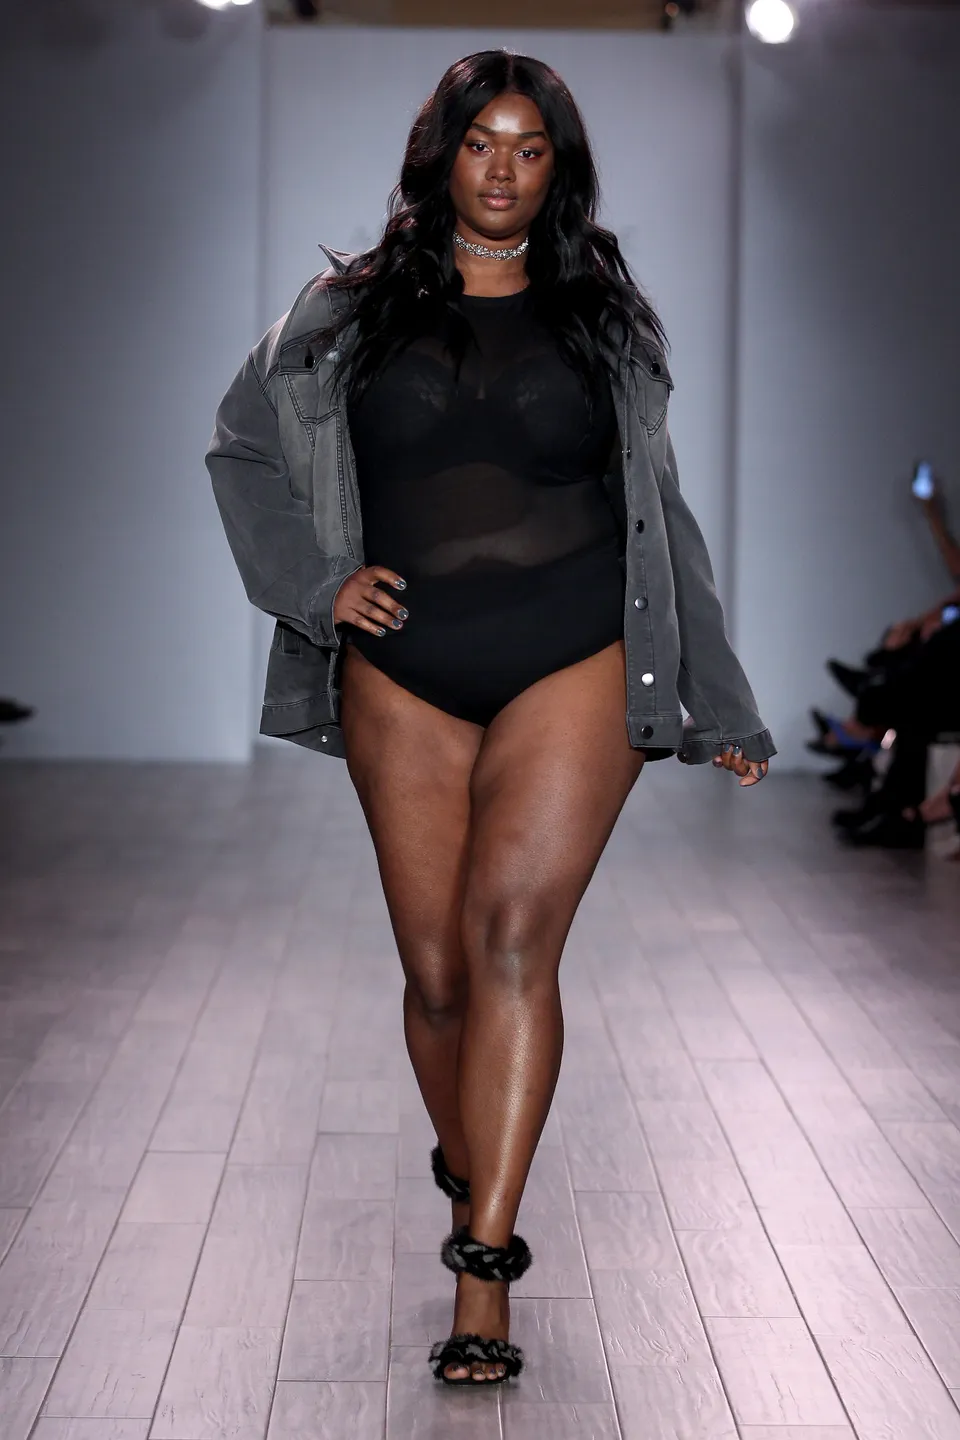 Plus-size model Ashley Graham showcases her curves in black lace underwear  on the runway at New York Fashion - Mirror Online